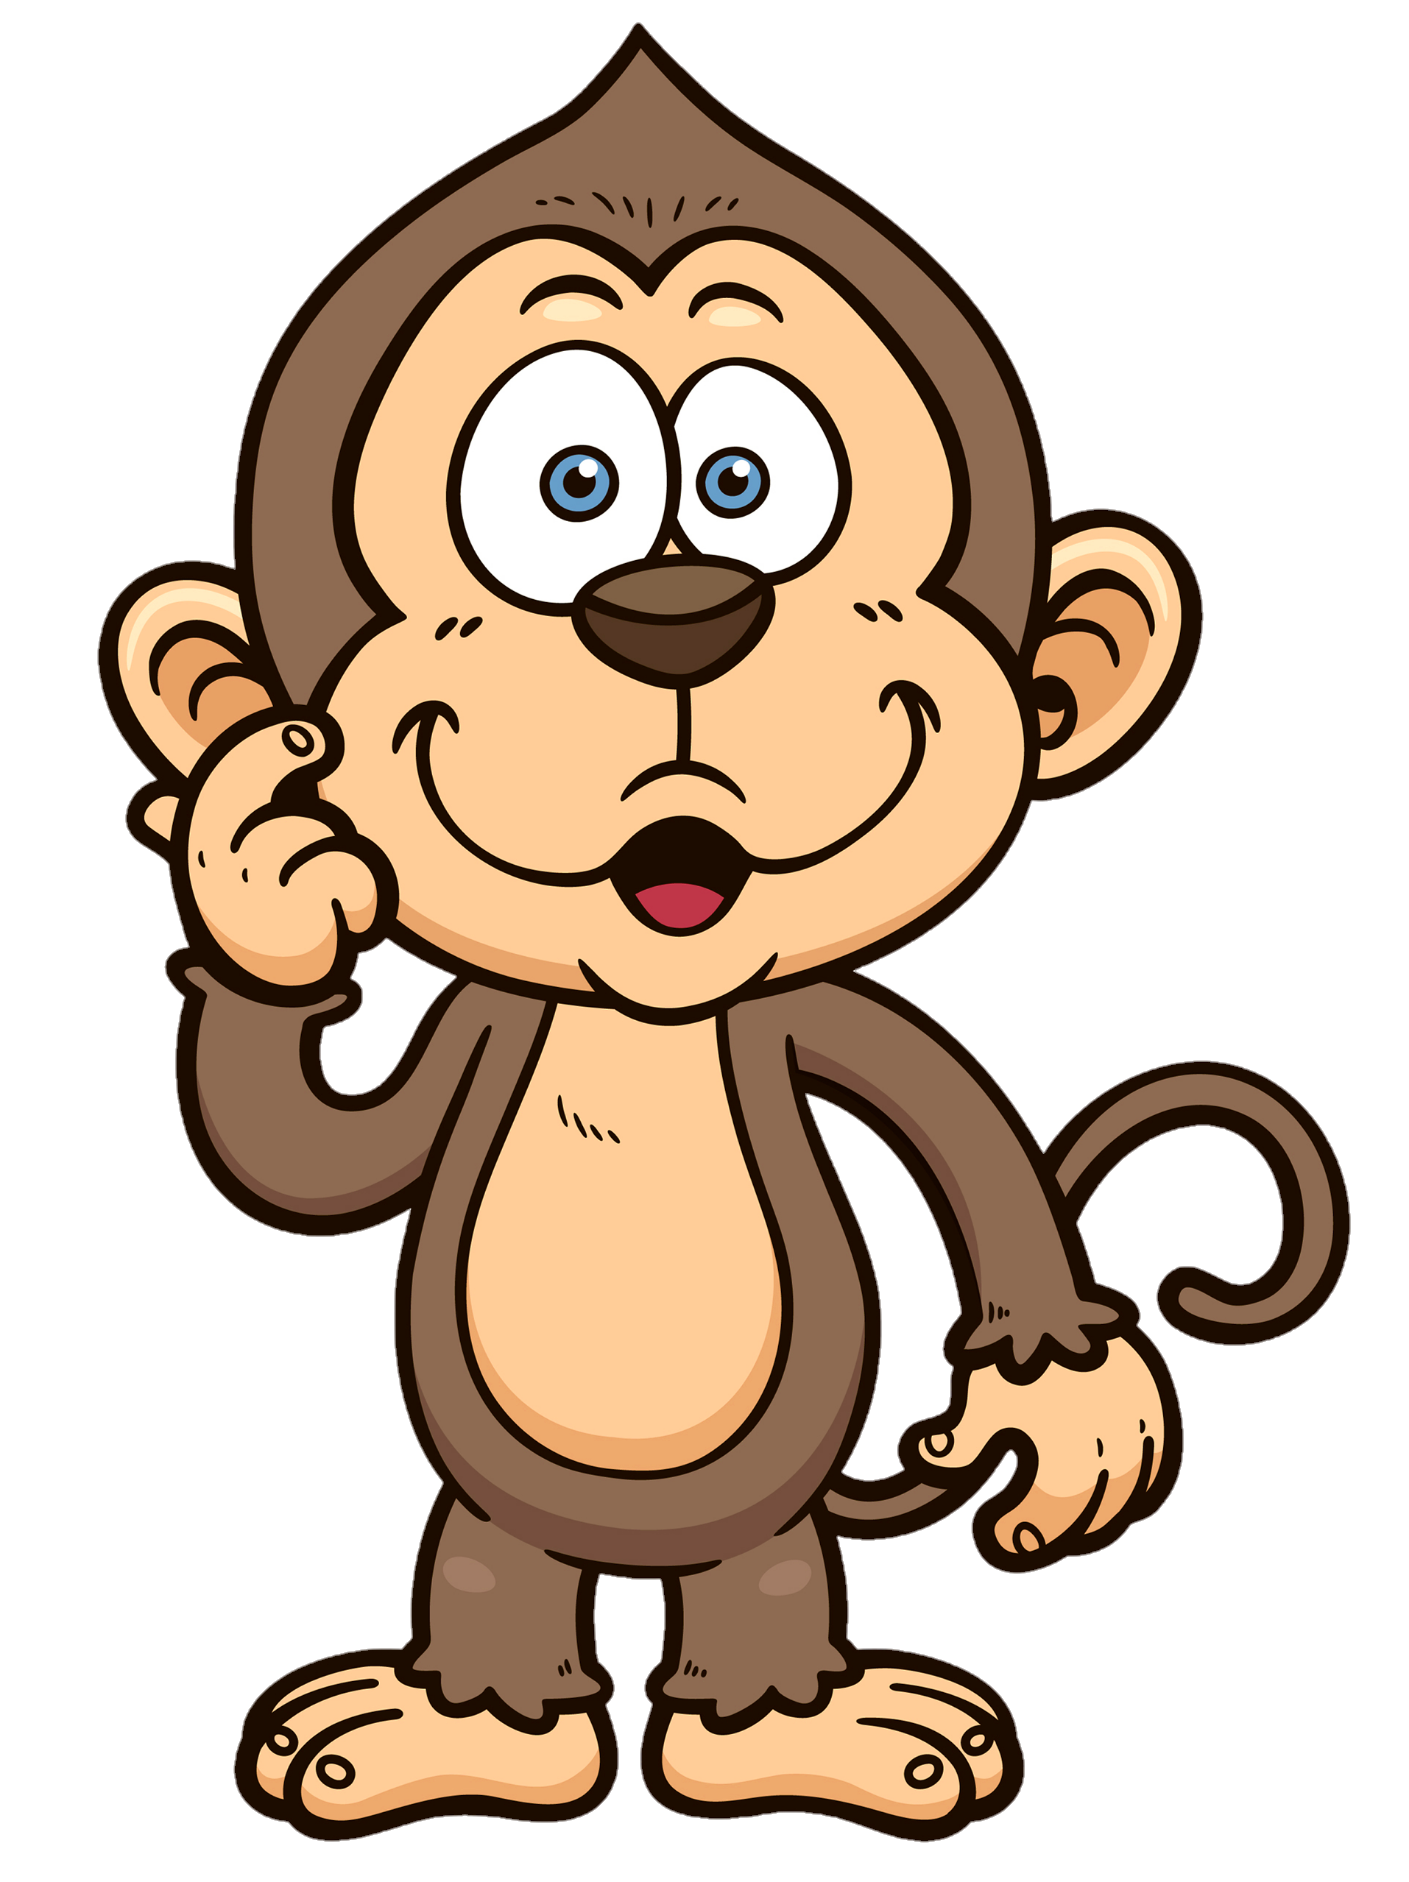 monkey-png-image-from-pngfre-7